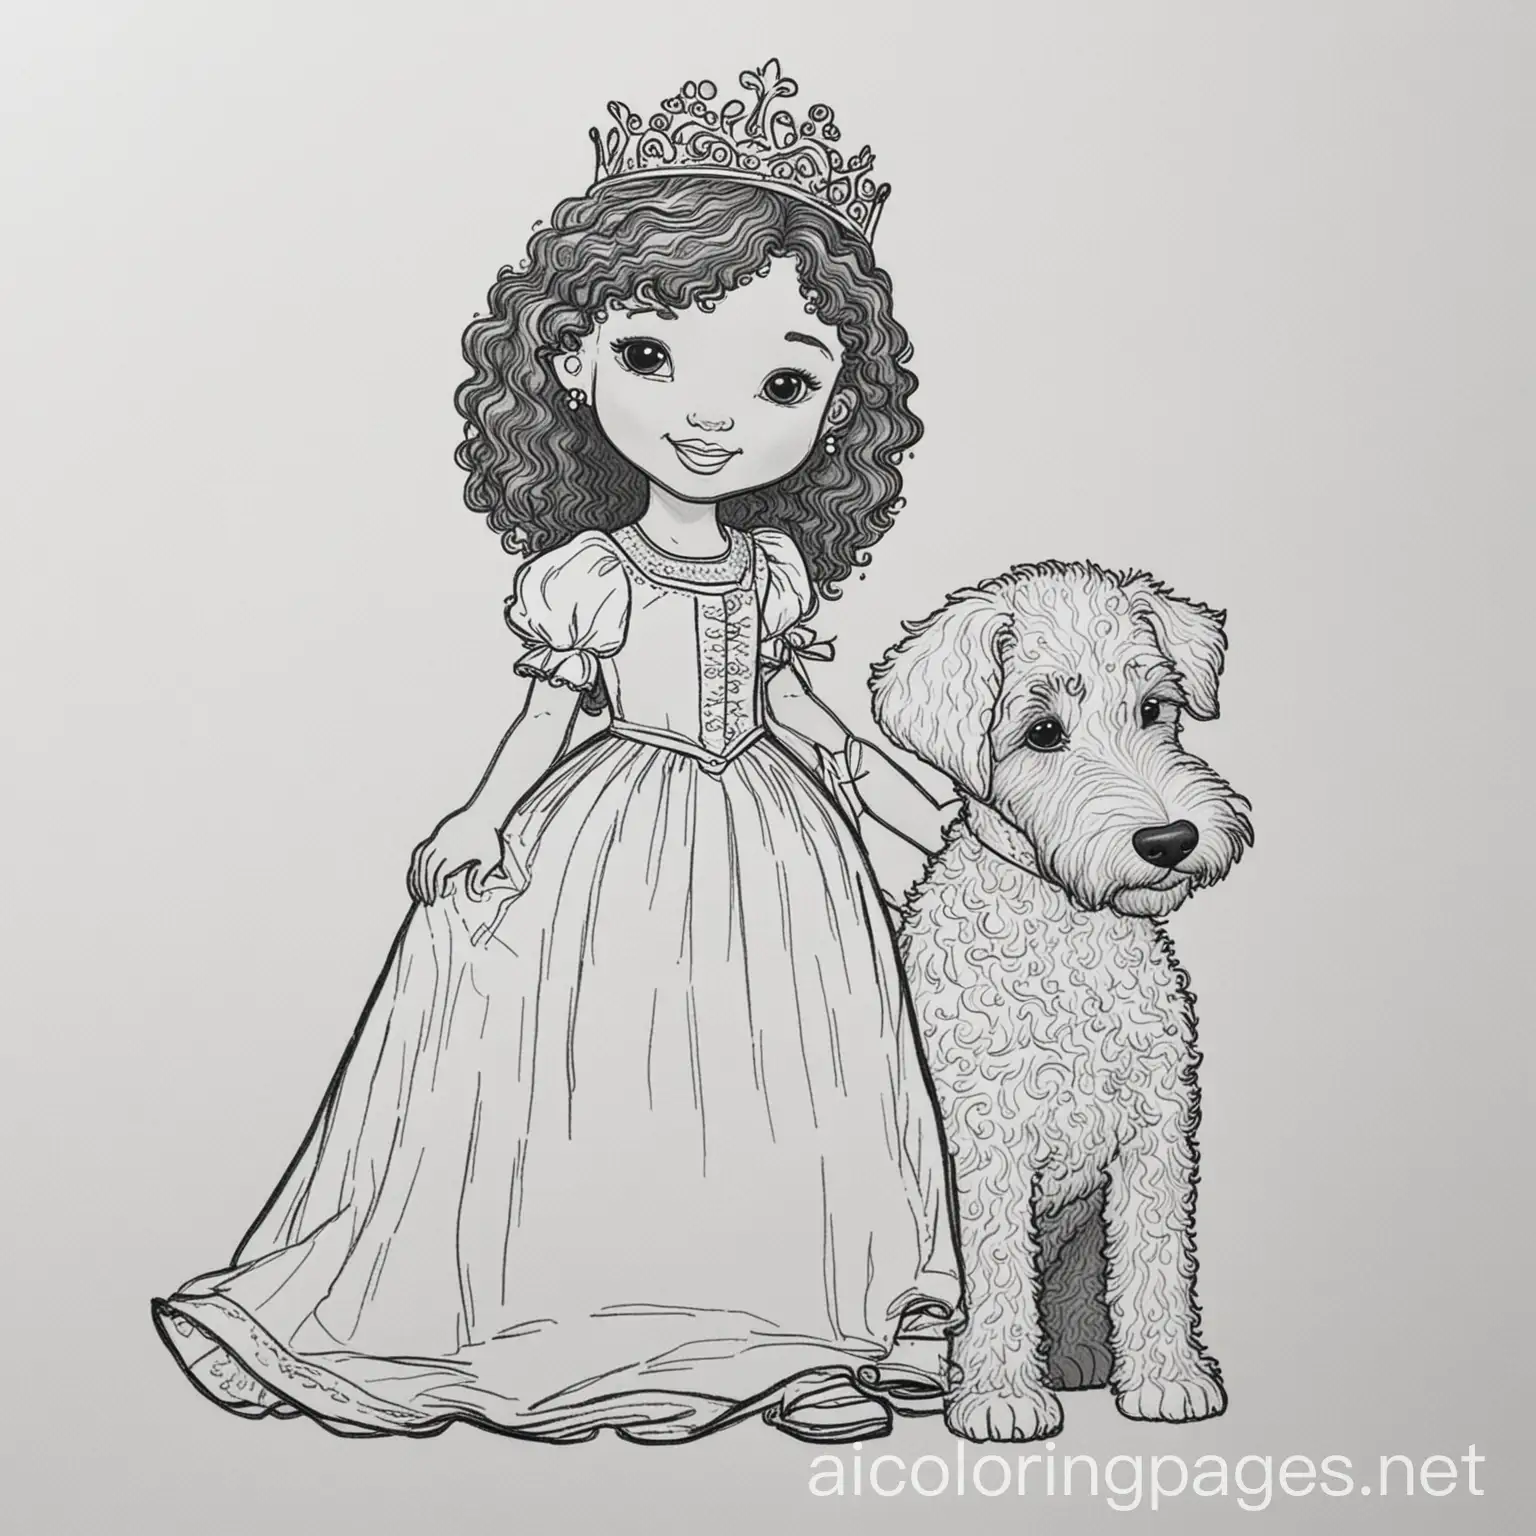 African-American-Princess-Coloring-Page-with-Labradoodle-Companion